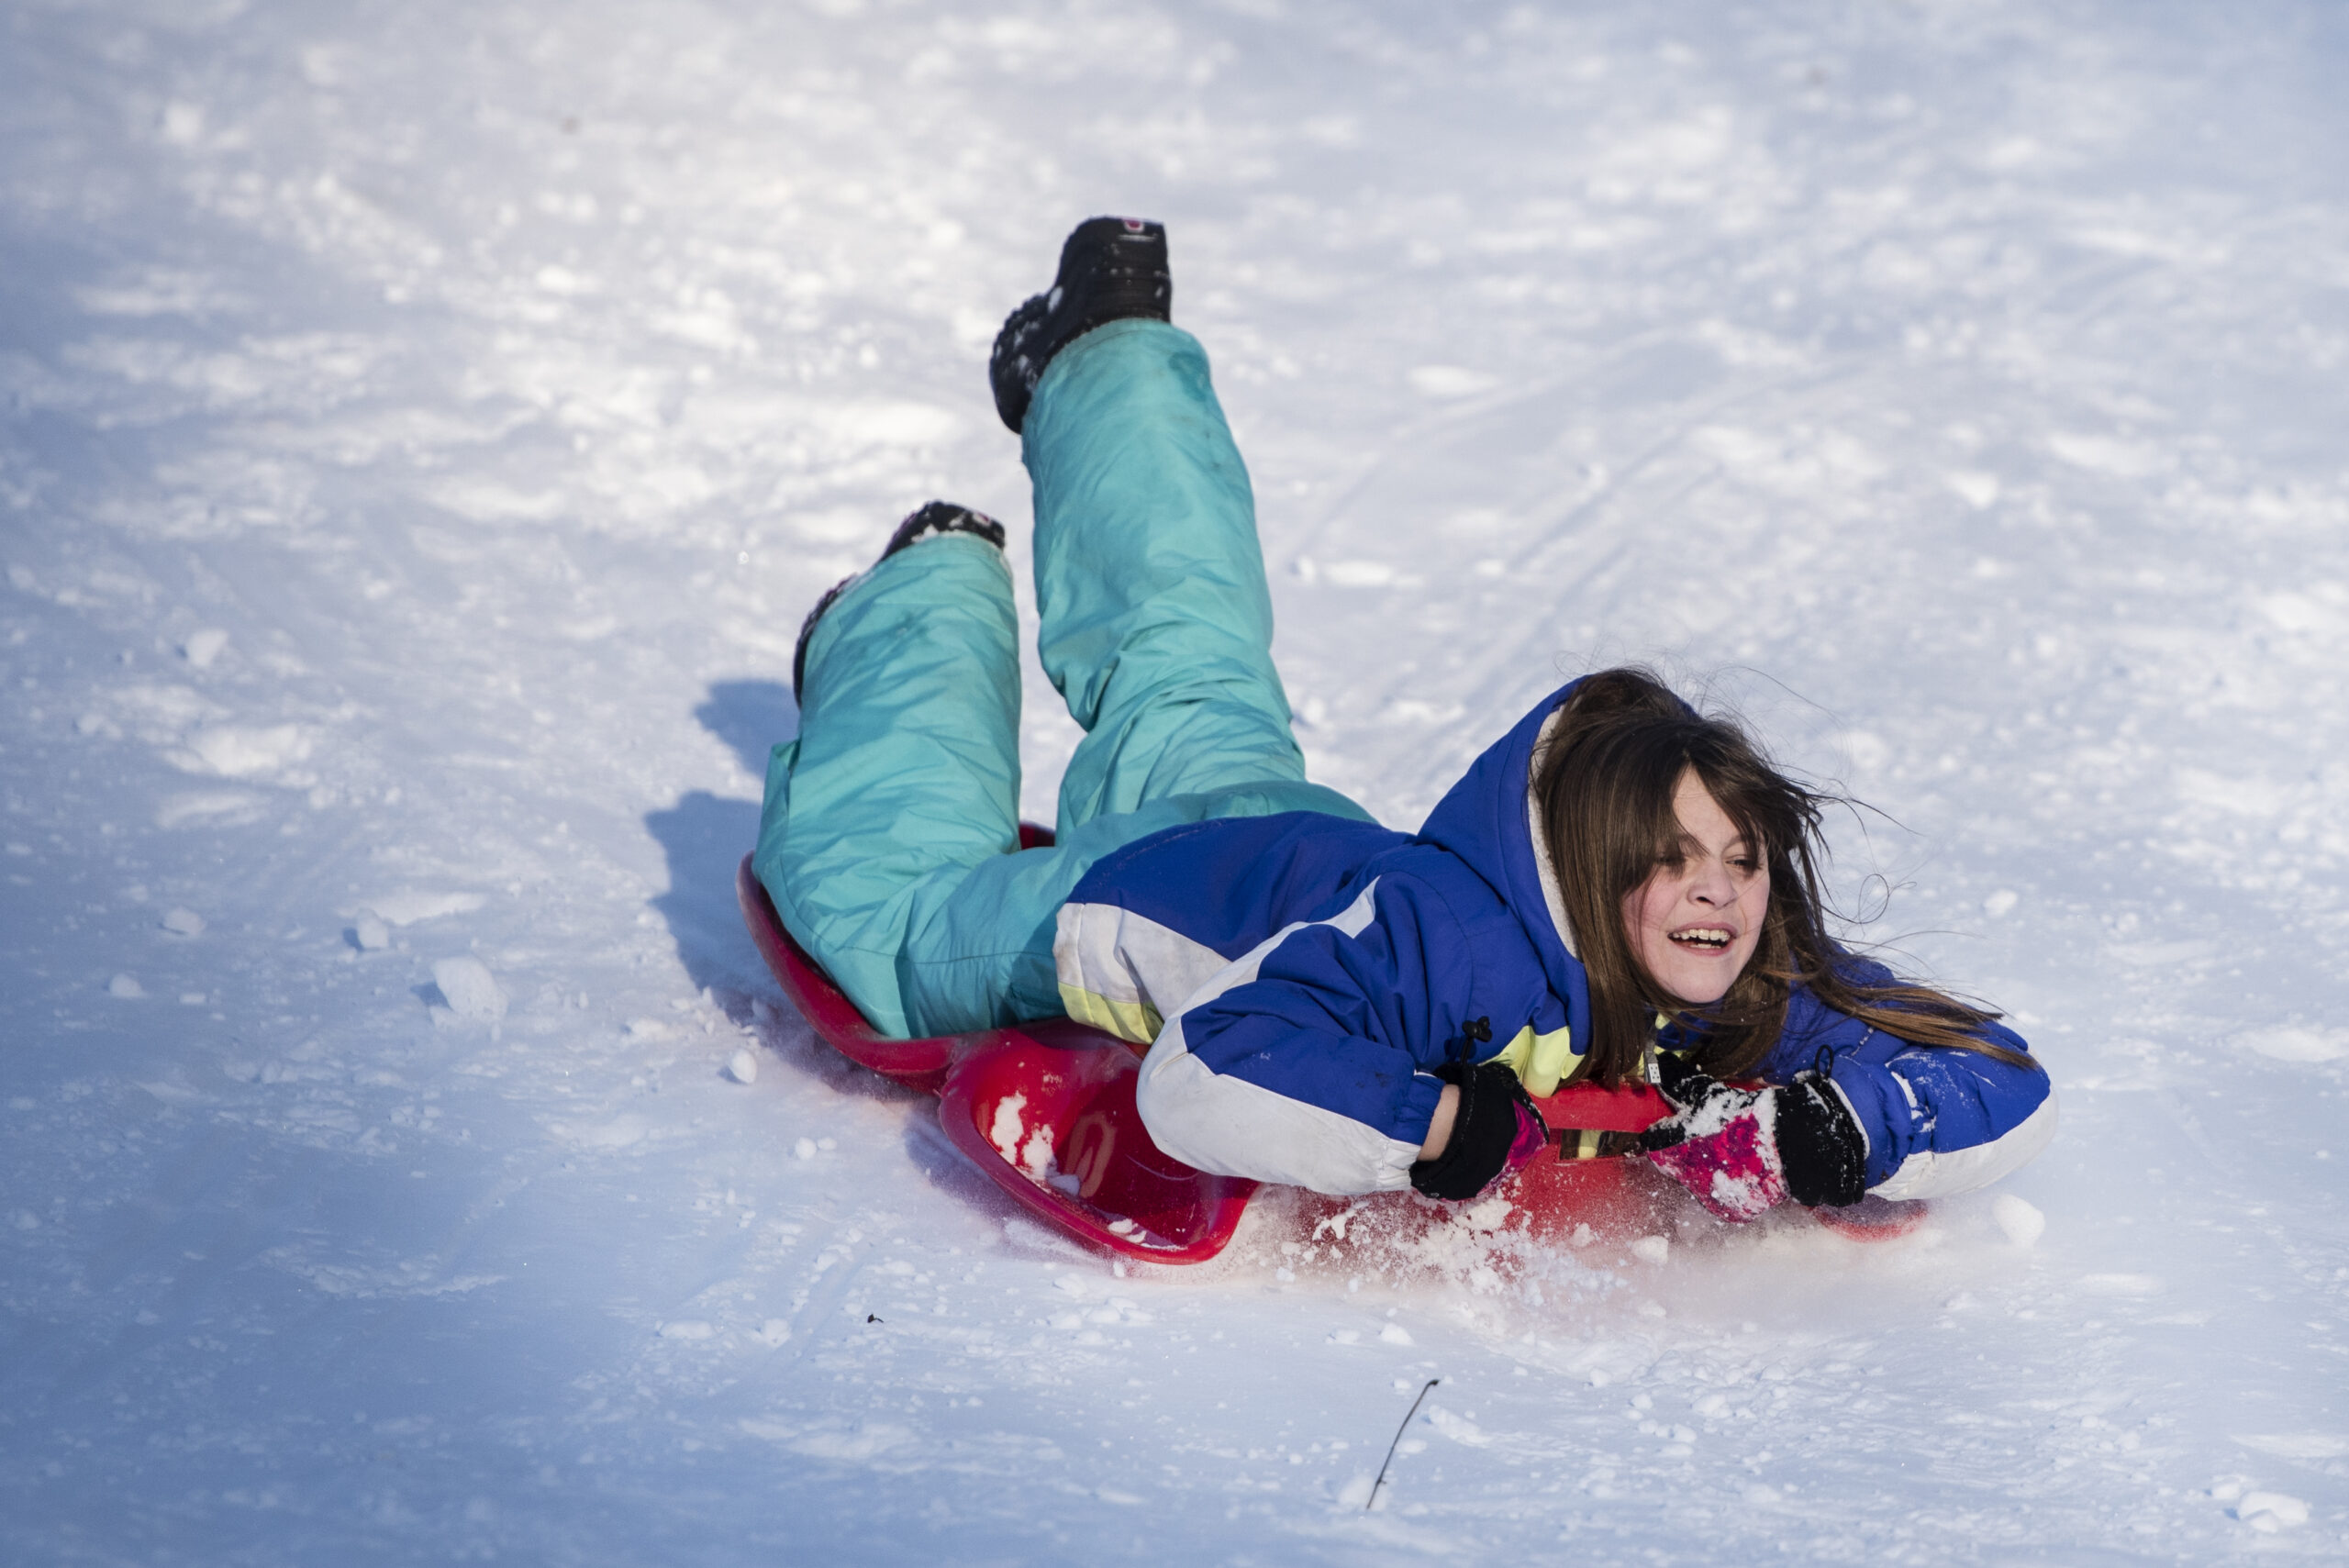 A girl smiles as she sleds down a hill on a red sled